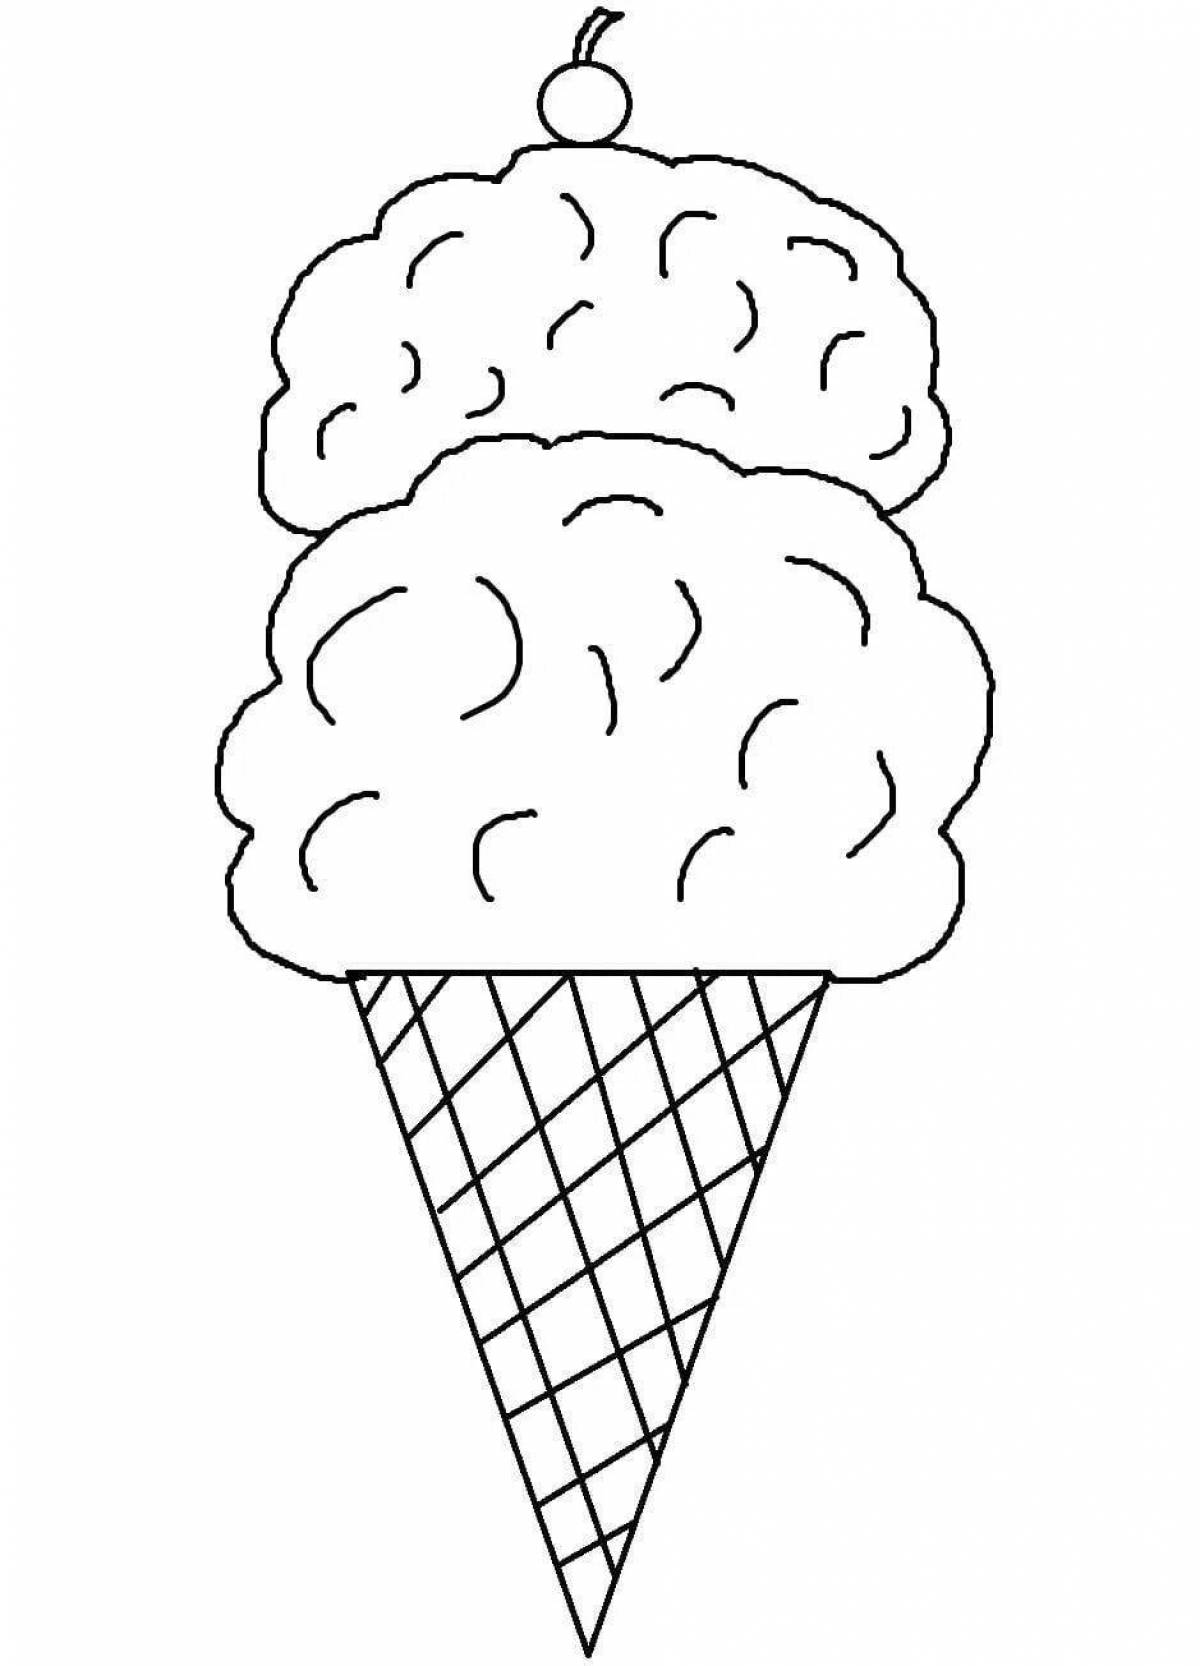 Fancy ice cream coloring page